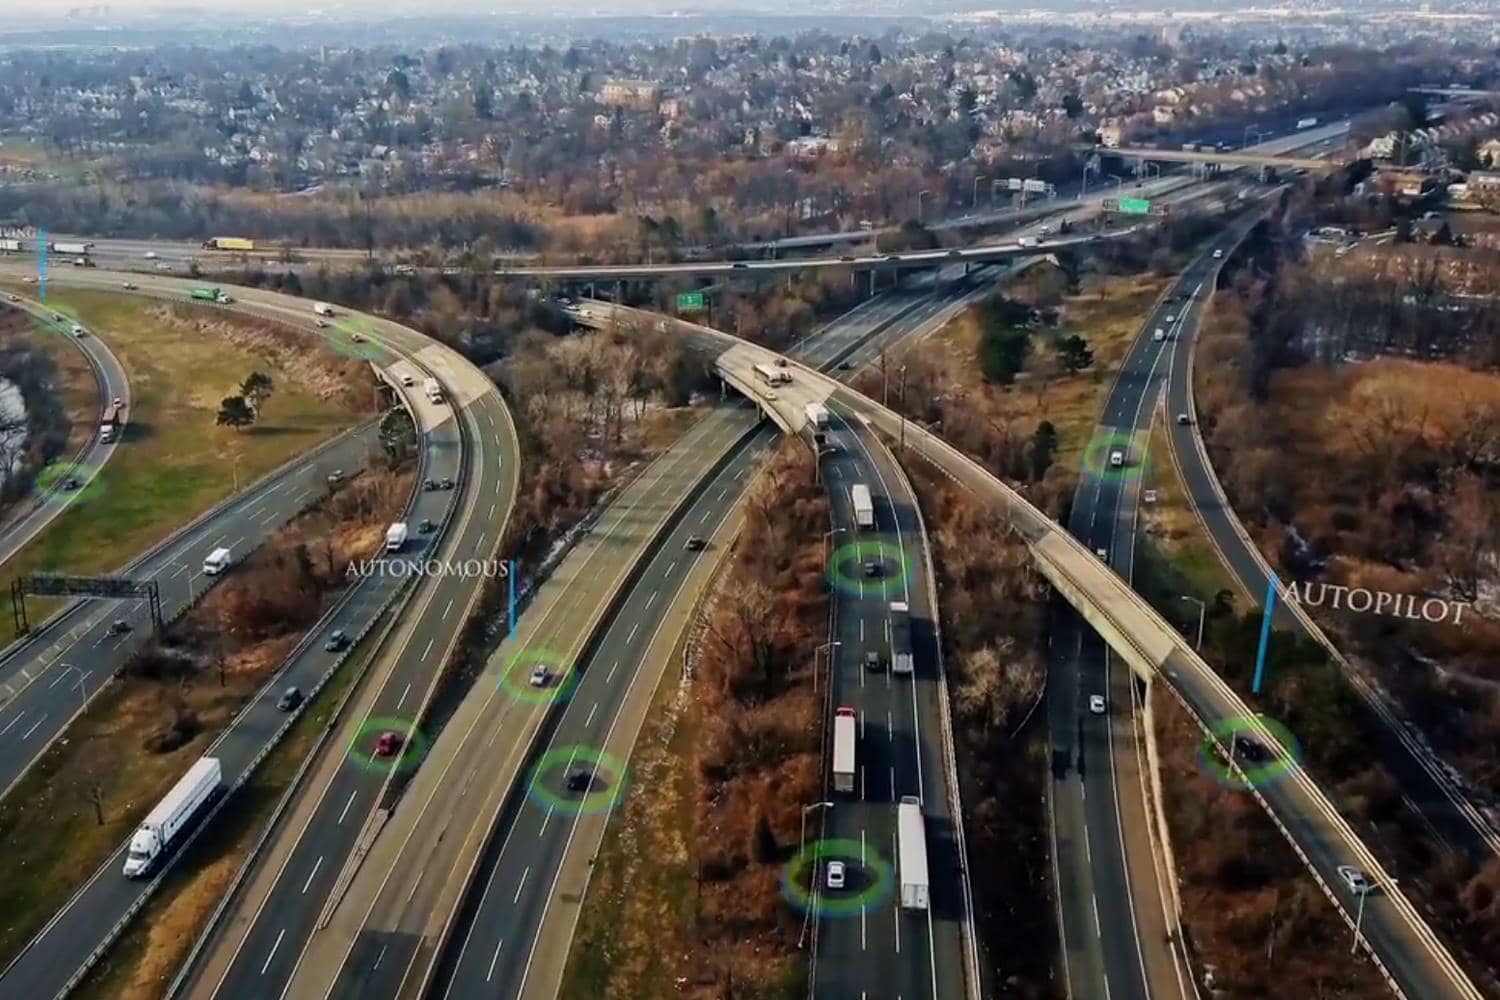 Overhead shot of self-driving cars on highway